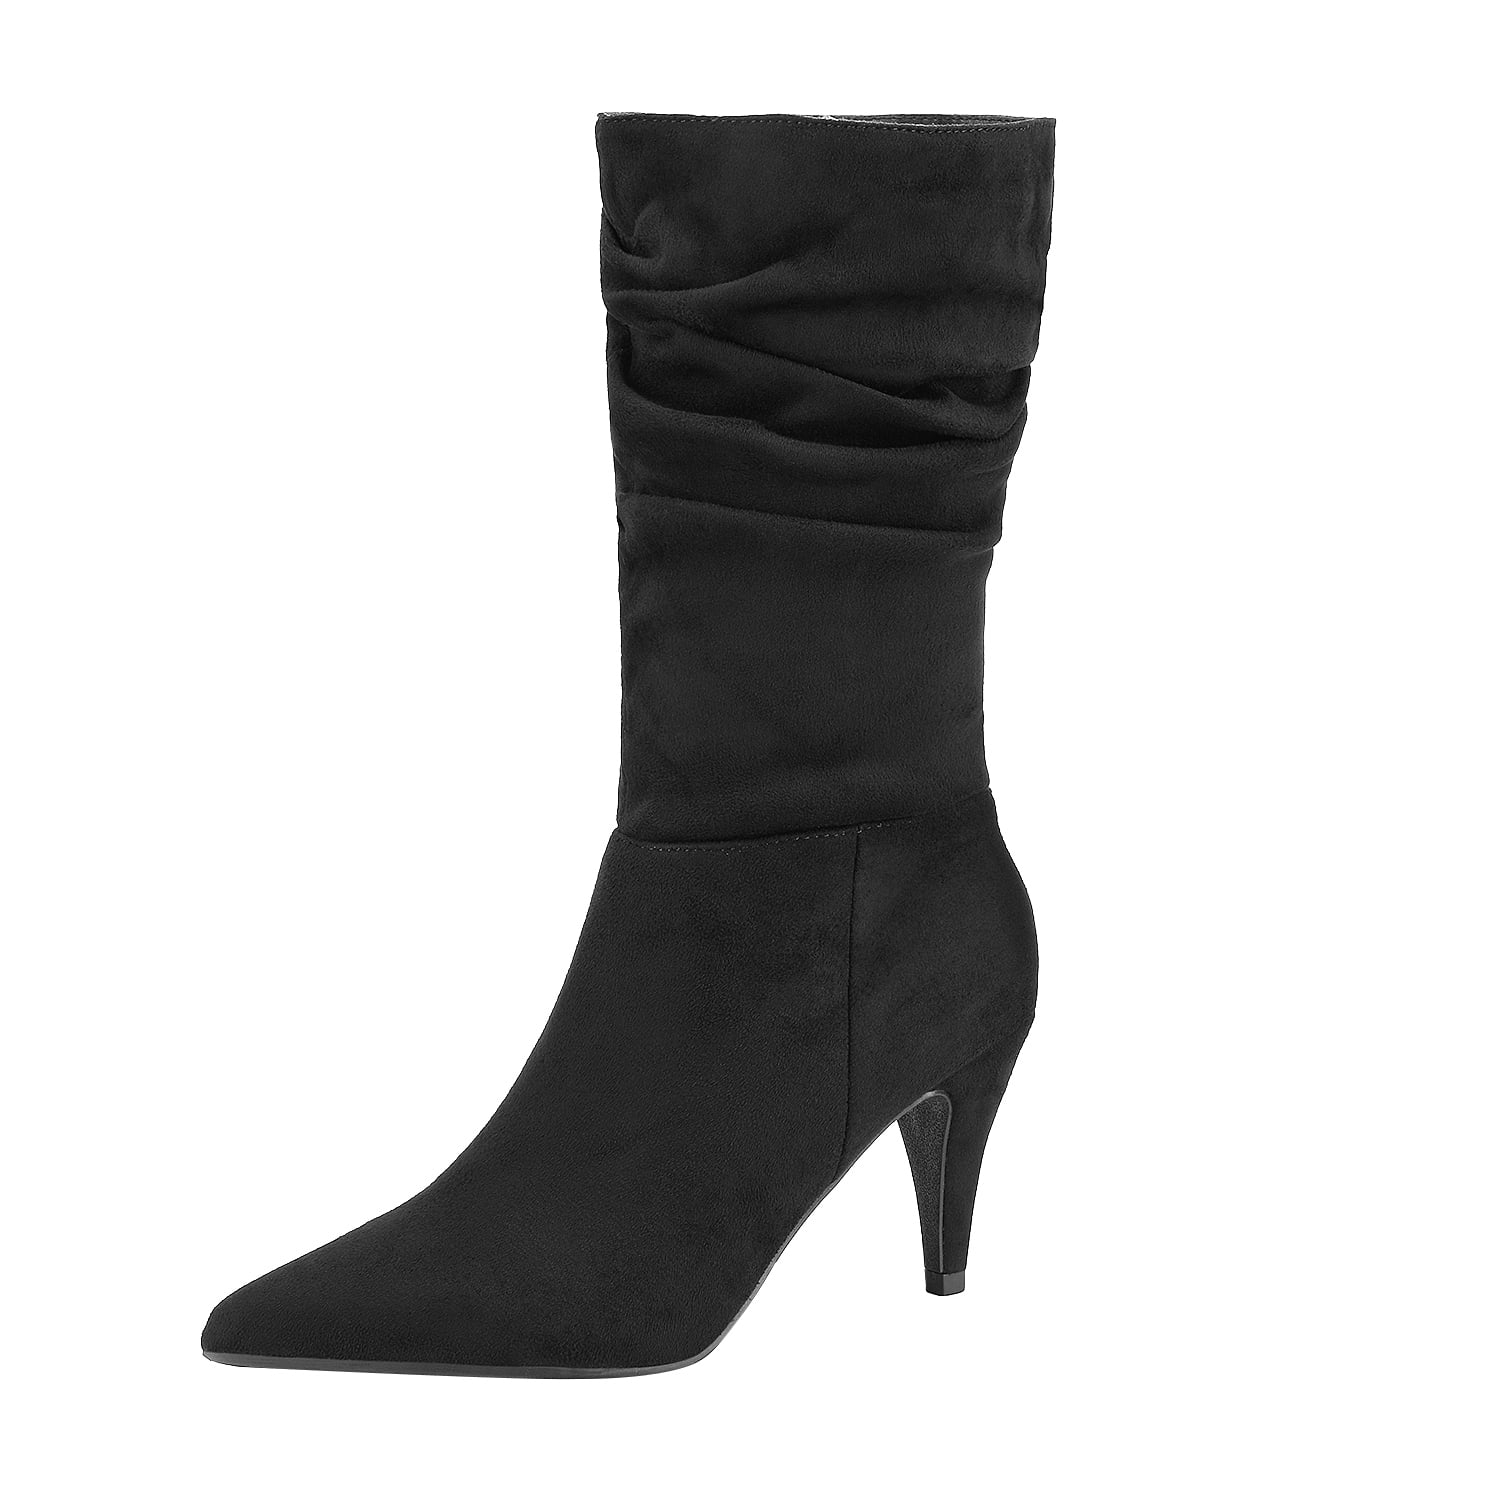 Dream Pairs Women's Fashion Pointed Toe Mid Calf Boots Stiletto